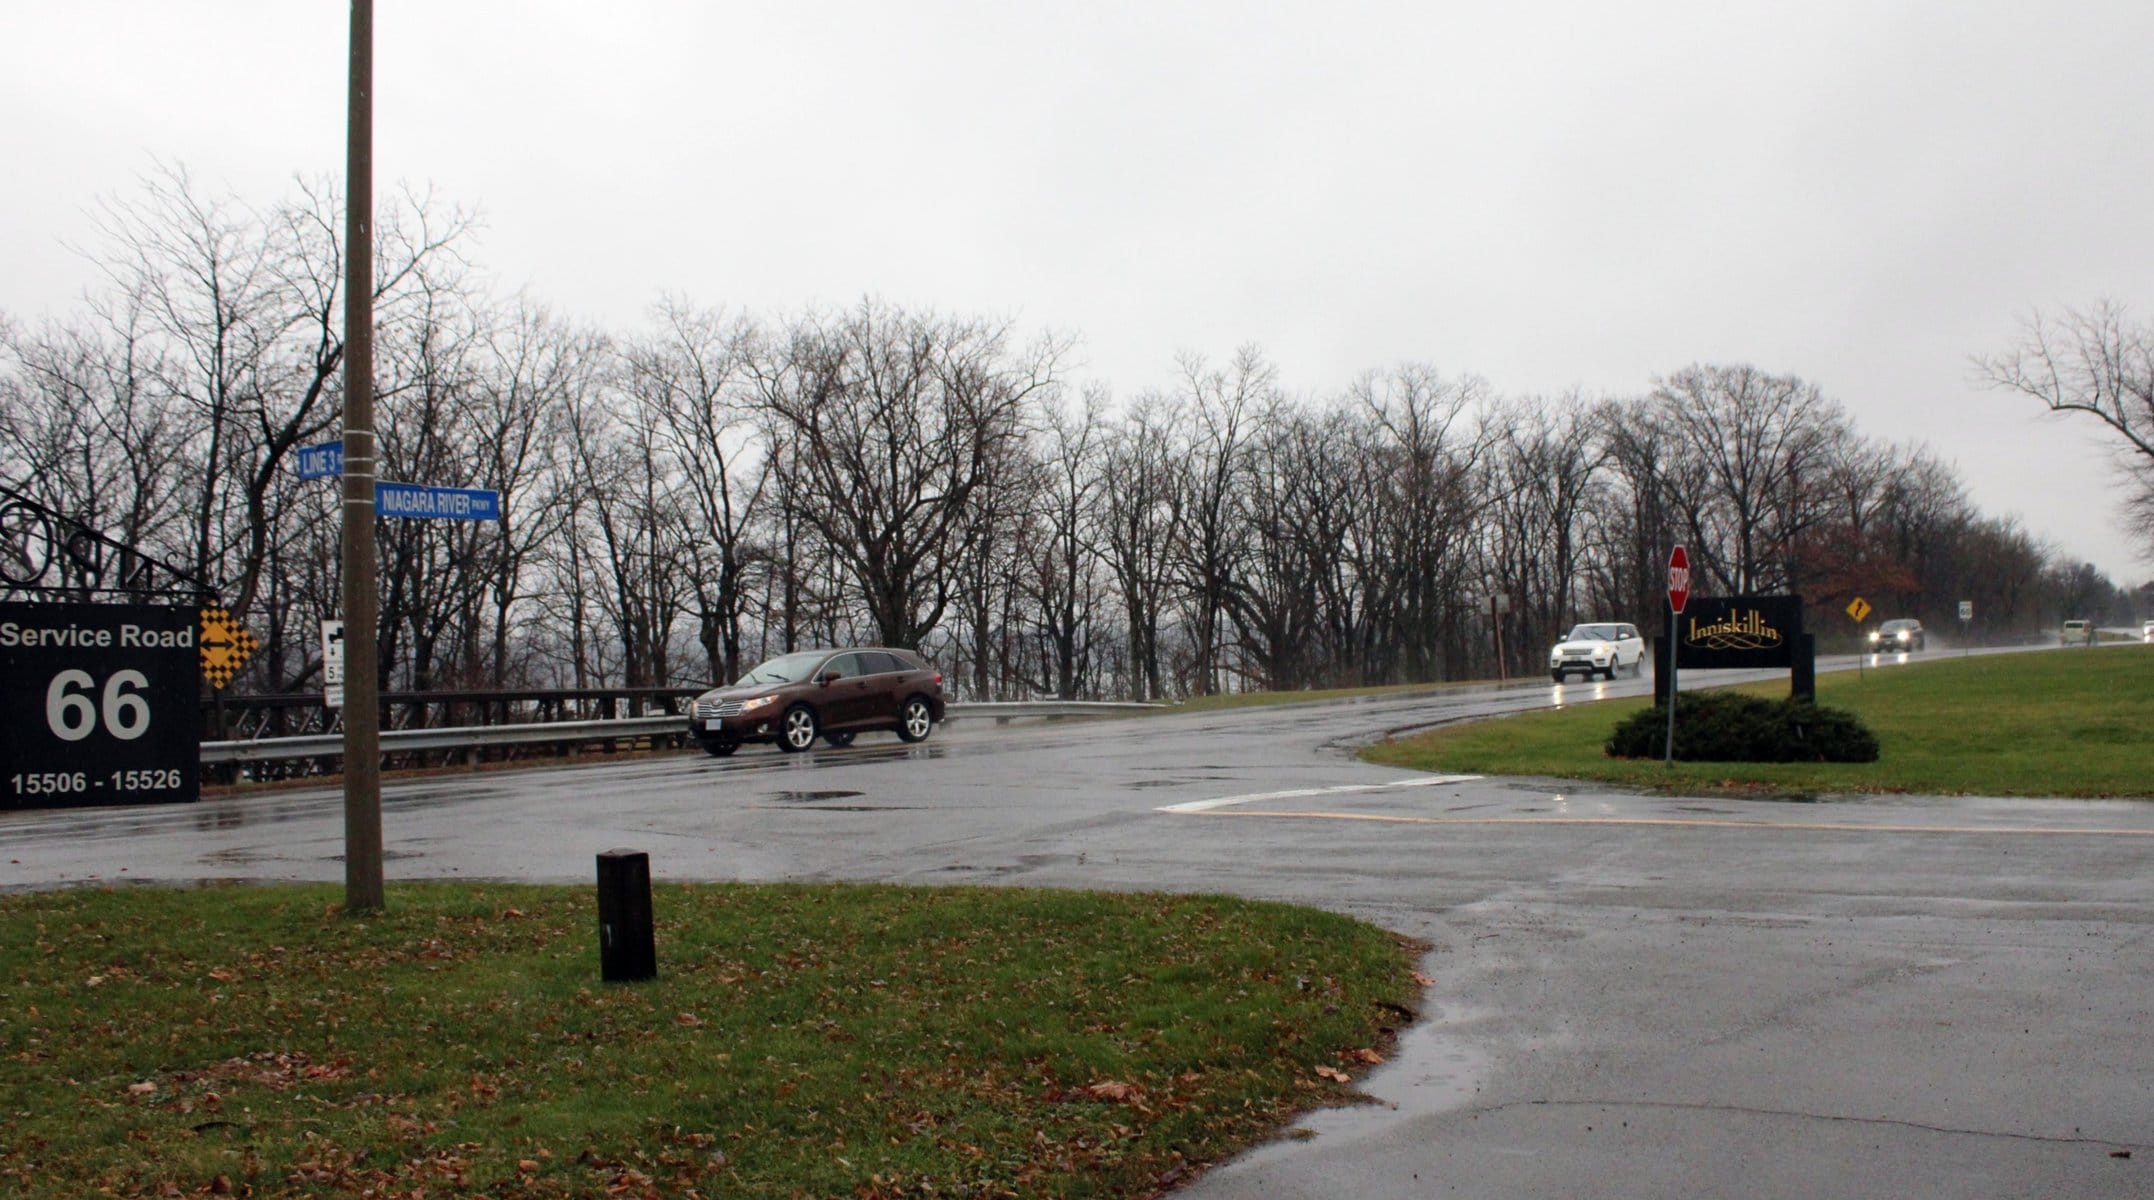 Infrastructure work will affect Parkway traffic in NOTL starting Monday